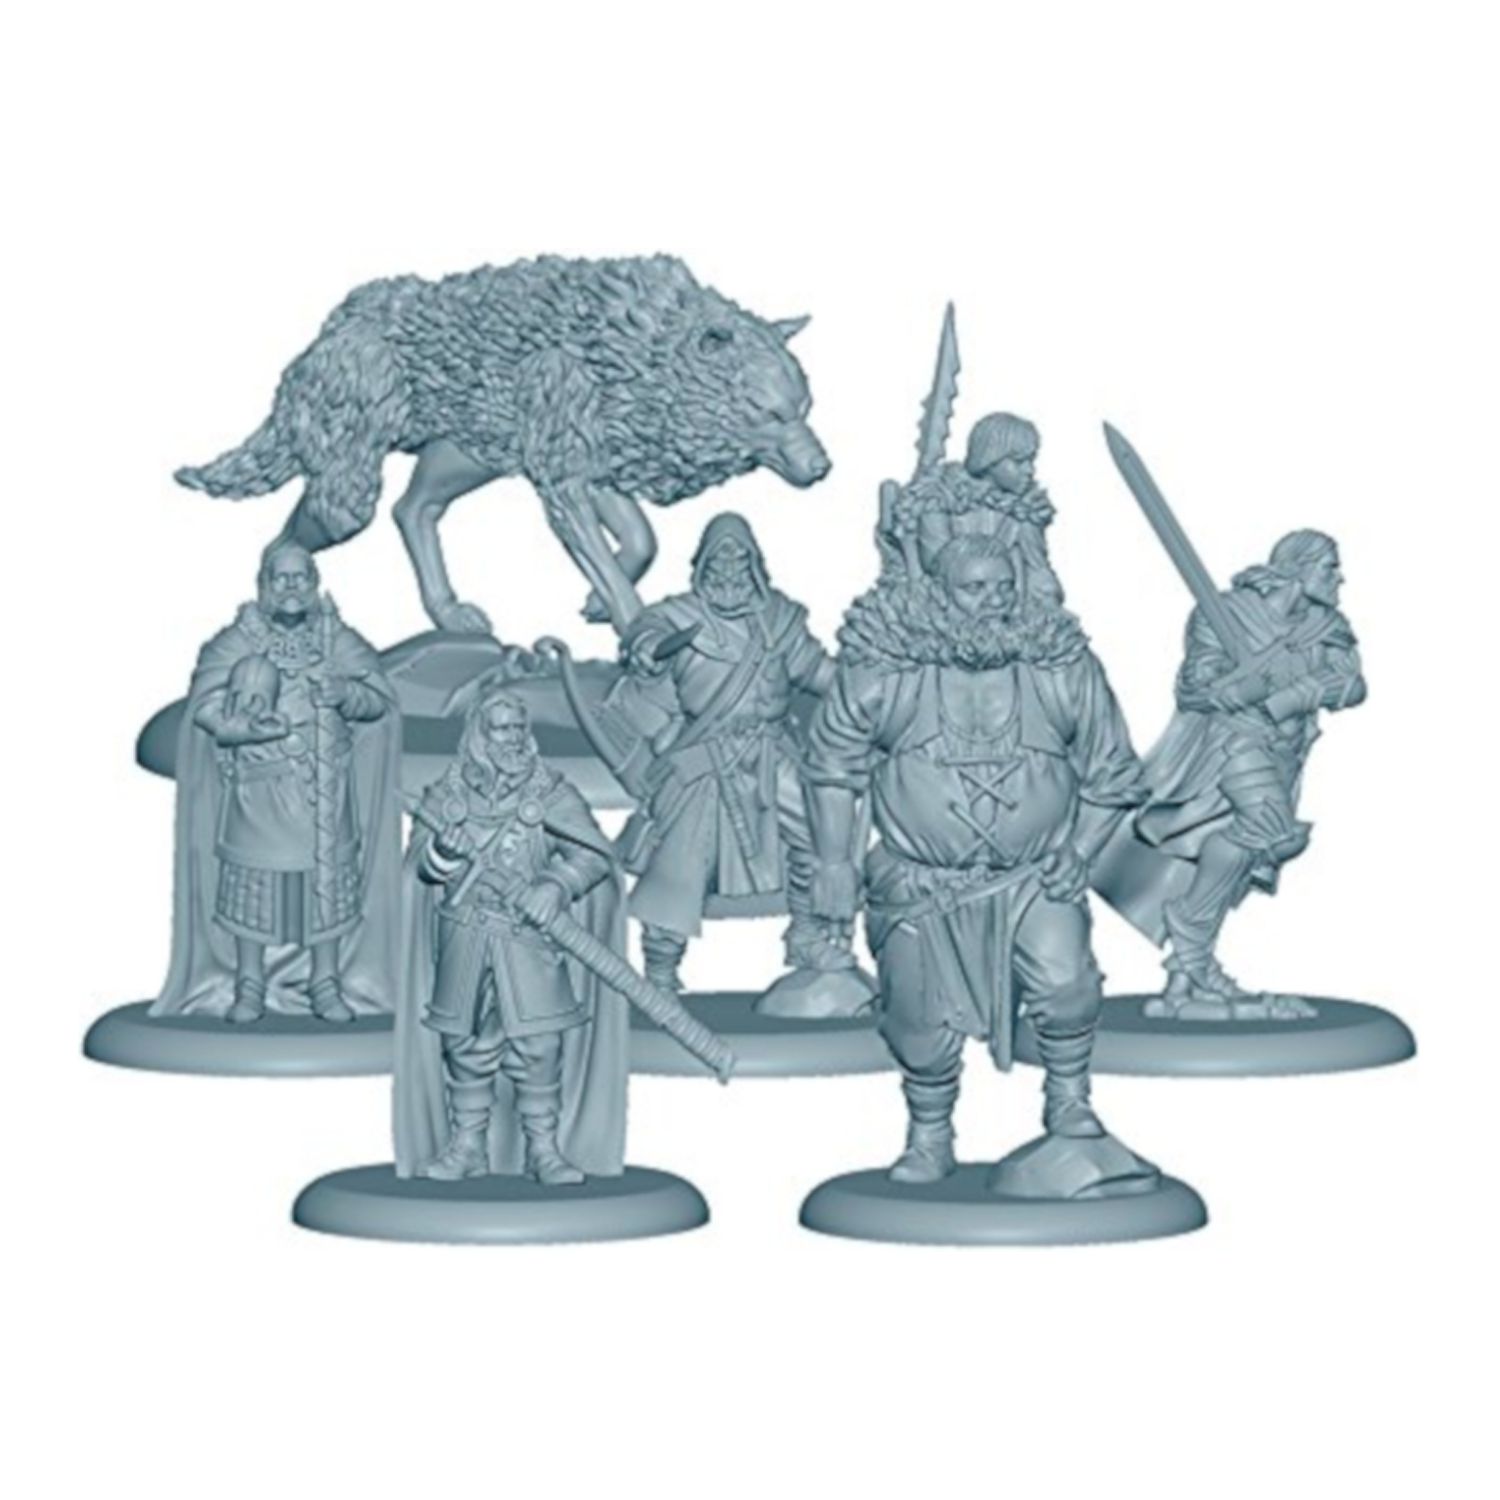 A Song of Ice & Fire: Tabletop Miniatures Game Stark Heroes 1 Box, by CMON - image 3 of 5